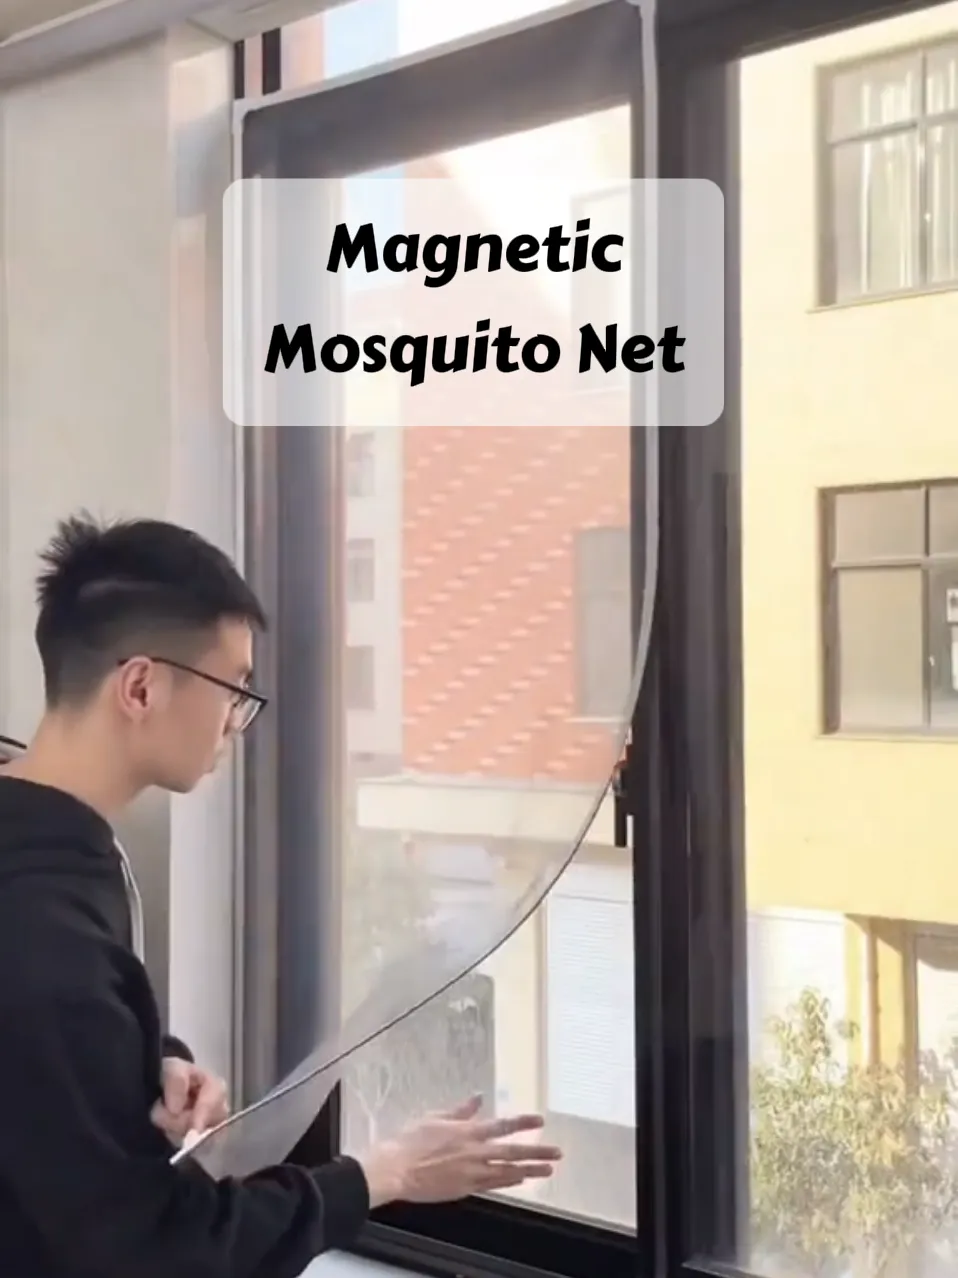 Magnetic Mosquito Net, Video published by RacunBarangBest